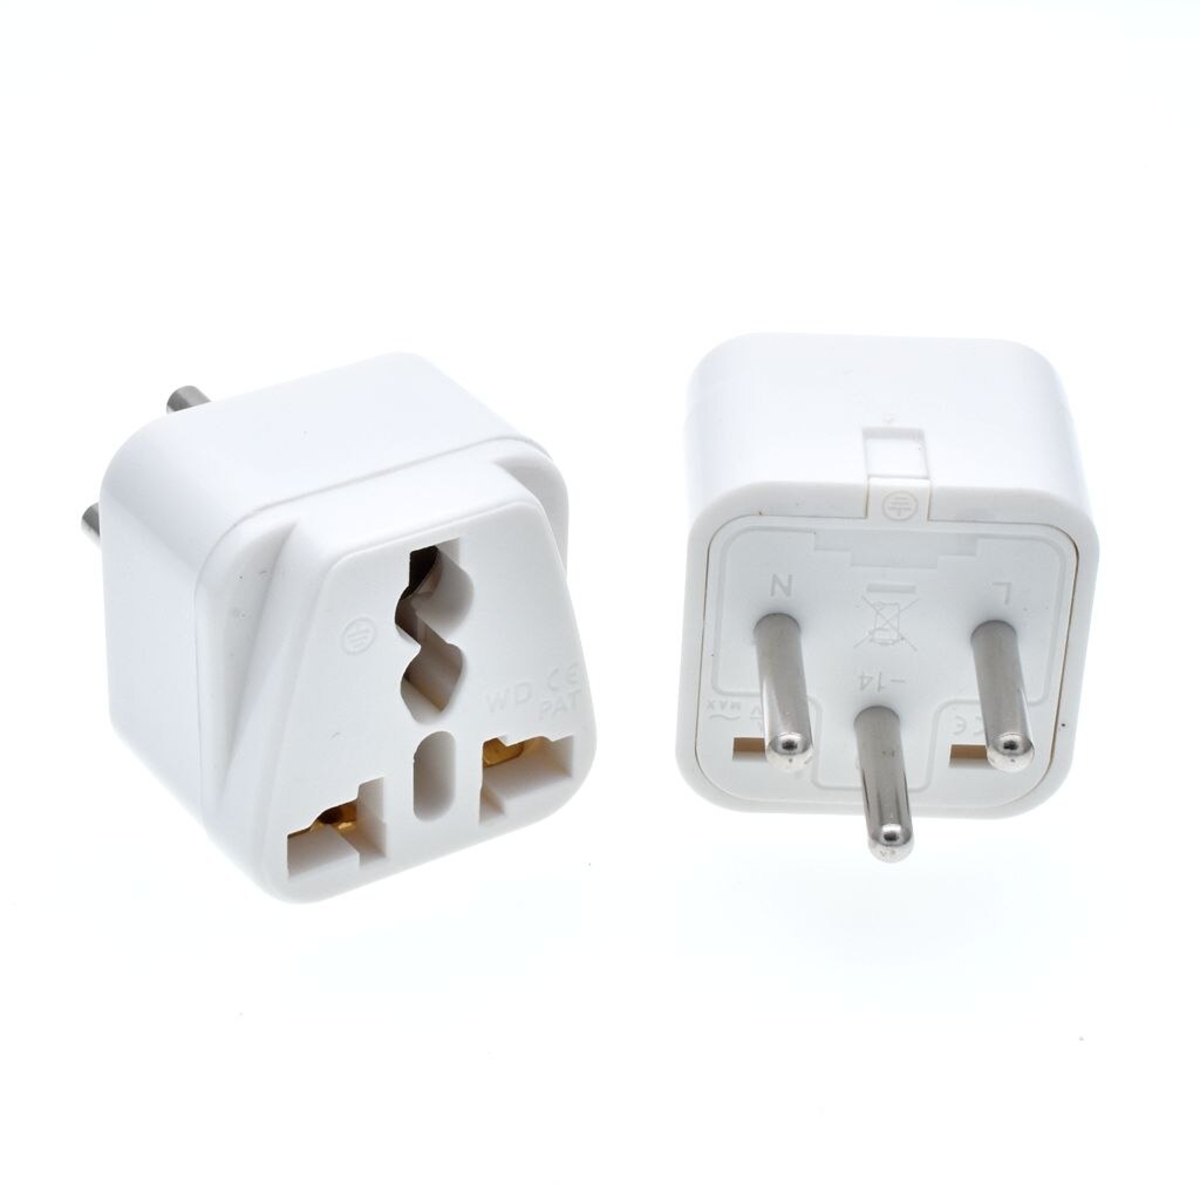 What Plug Adapter Do I Need For Israel